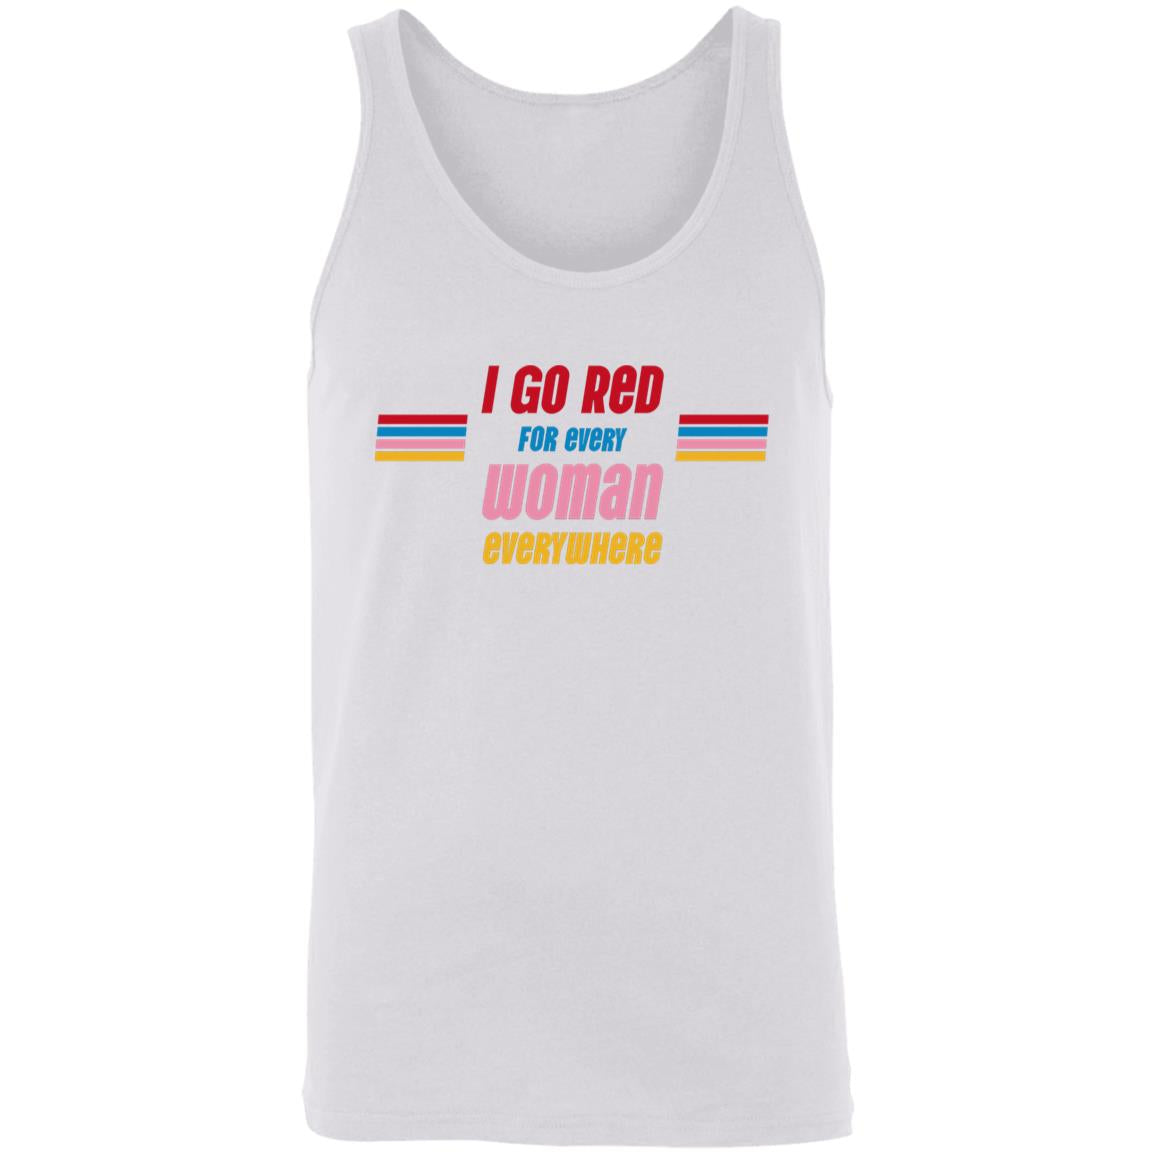 White tank with "I Go Red For every Woman everywhere" placed center chest in colorful letters.